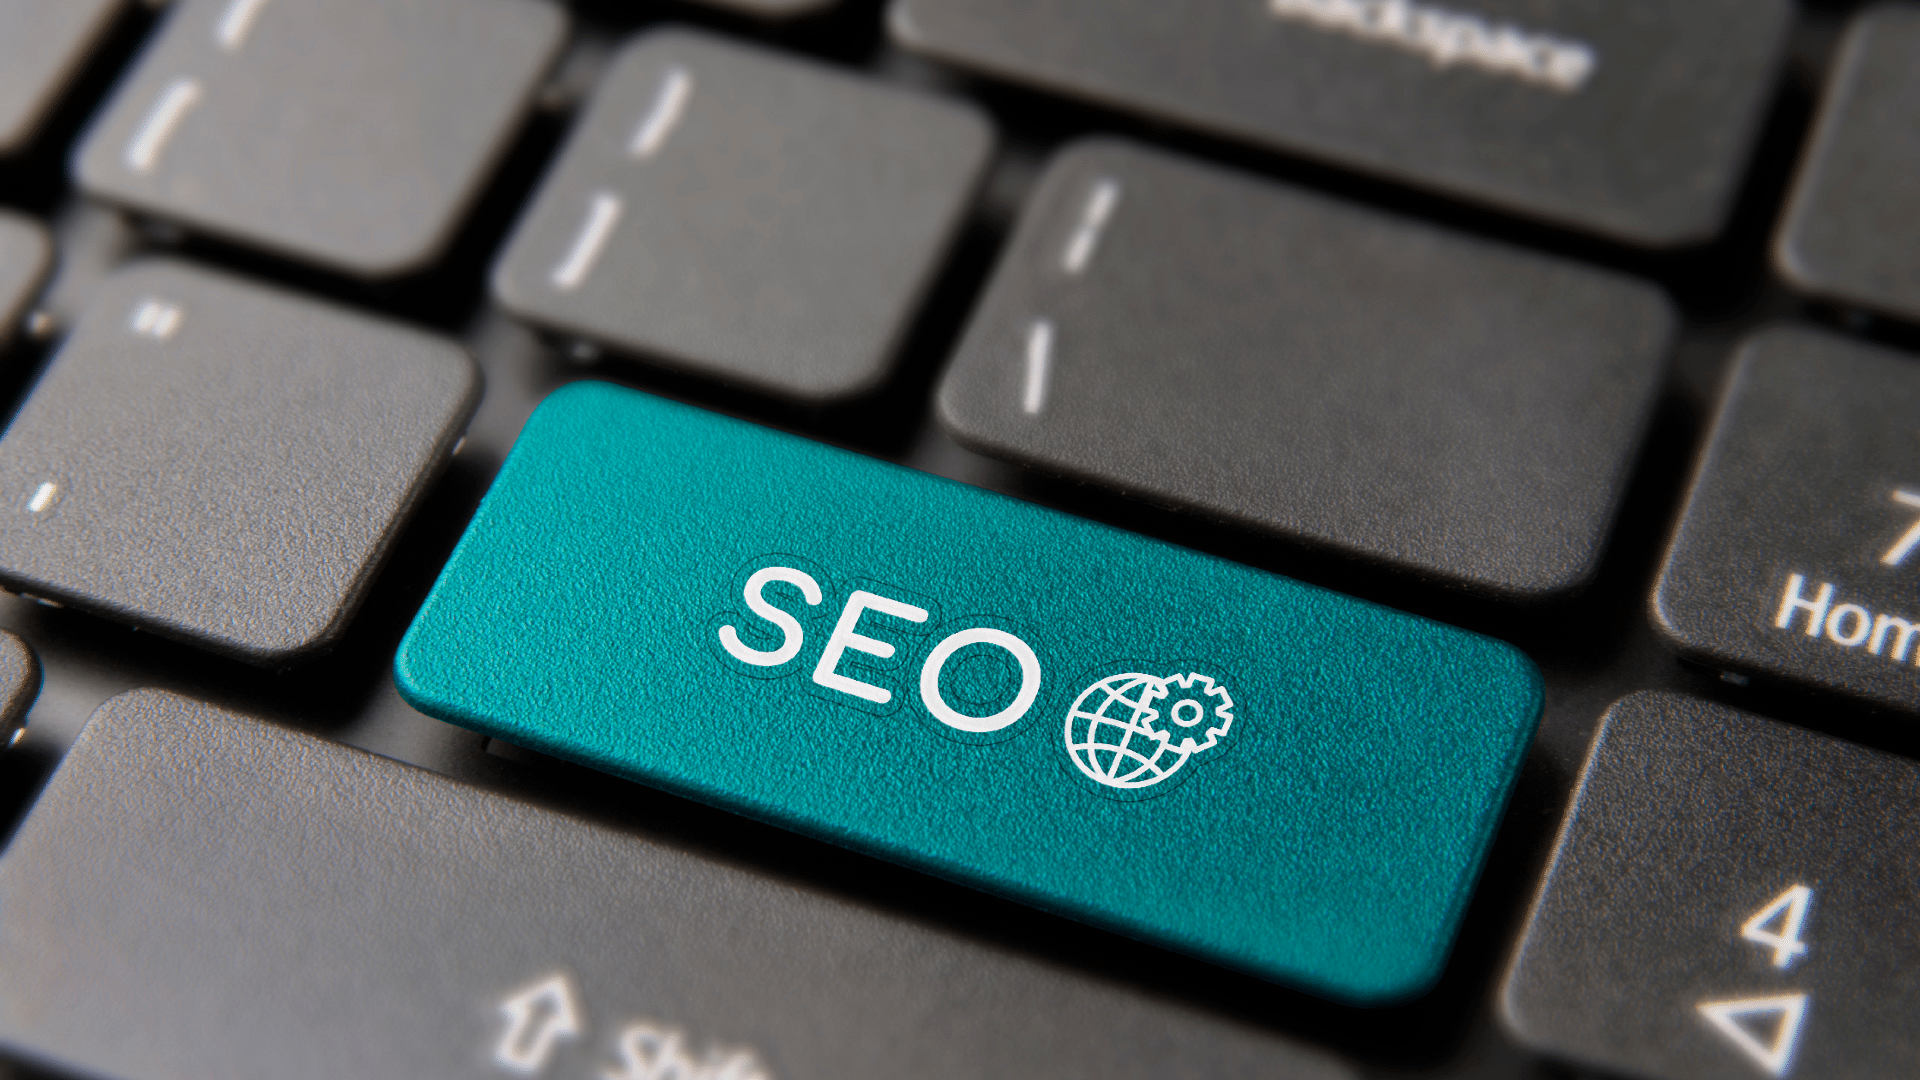 blogging improves SEO - an SEO button sits on a keyboard